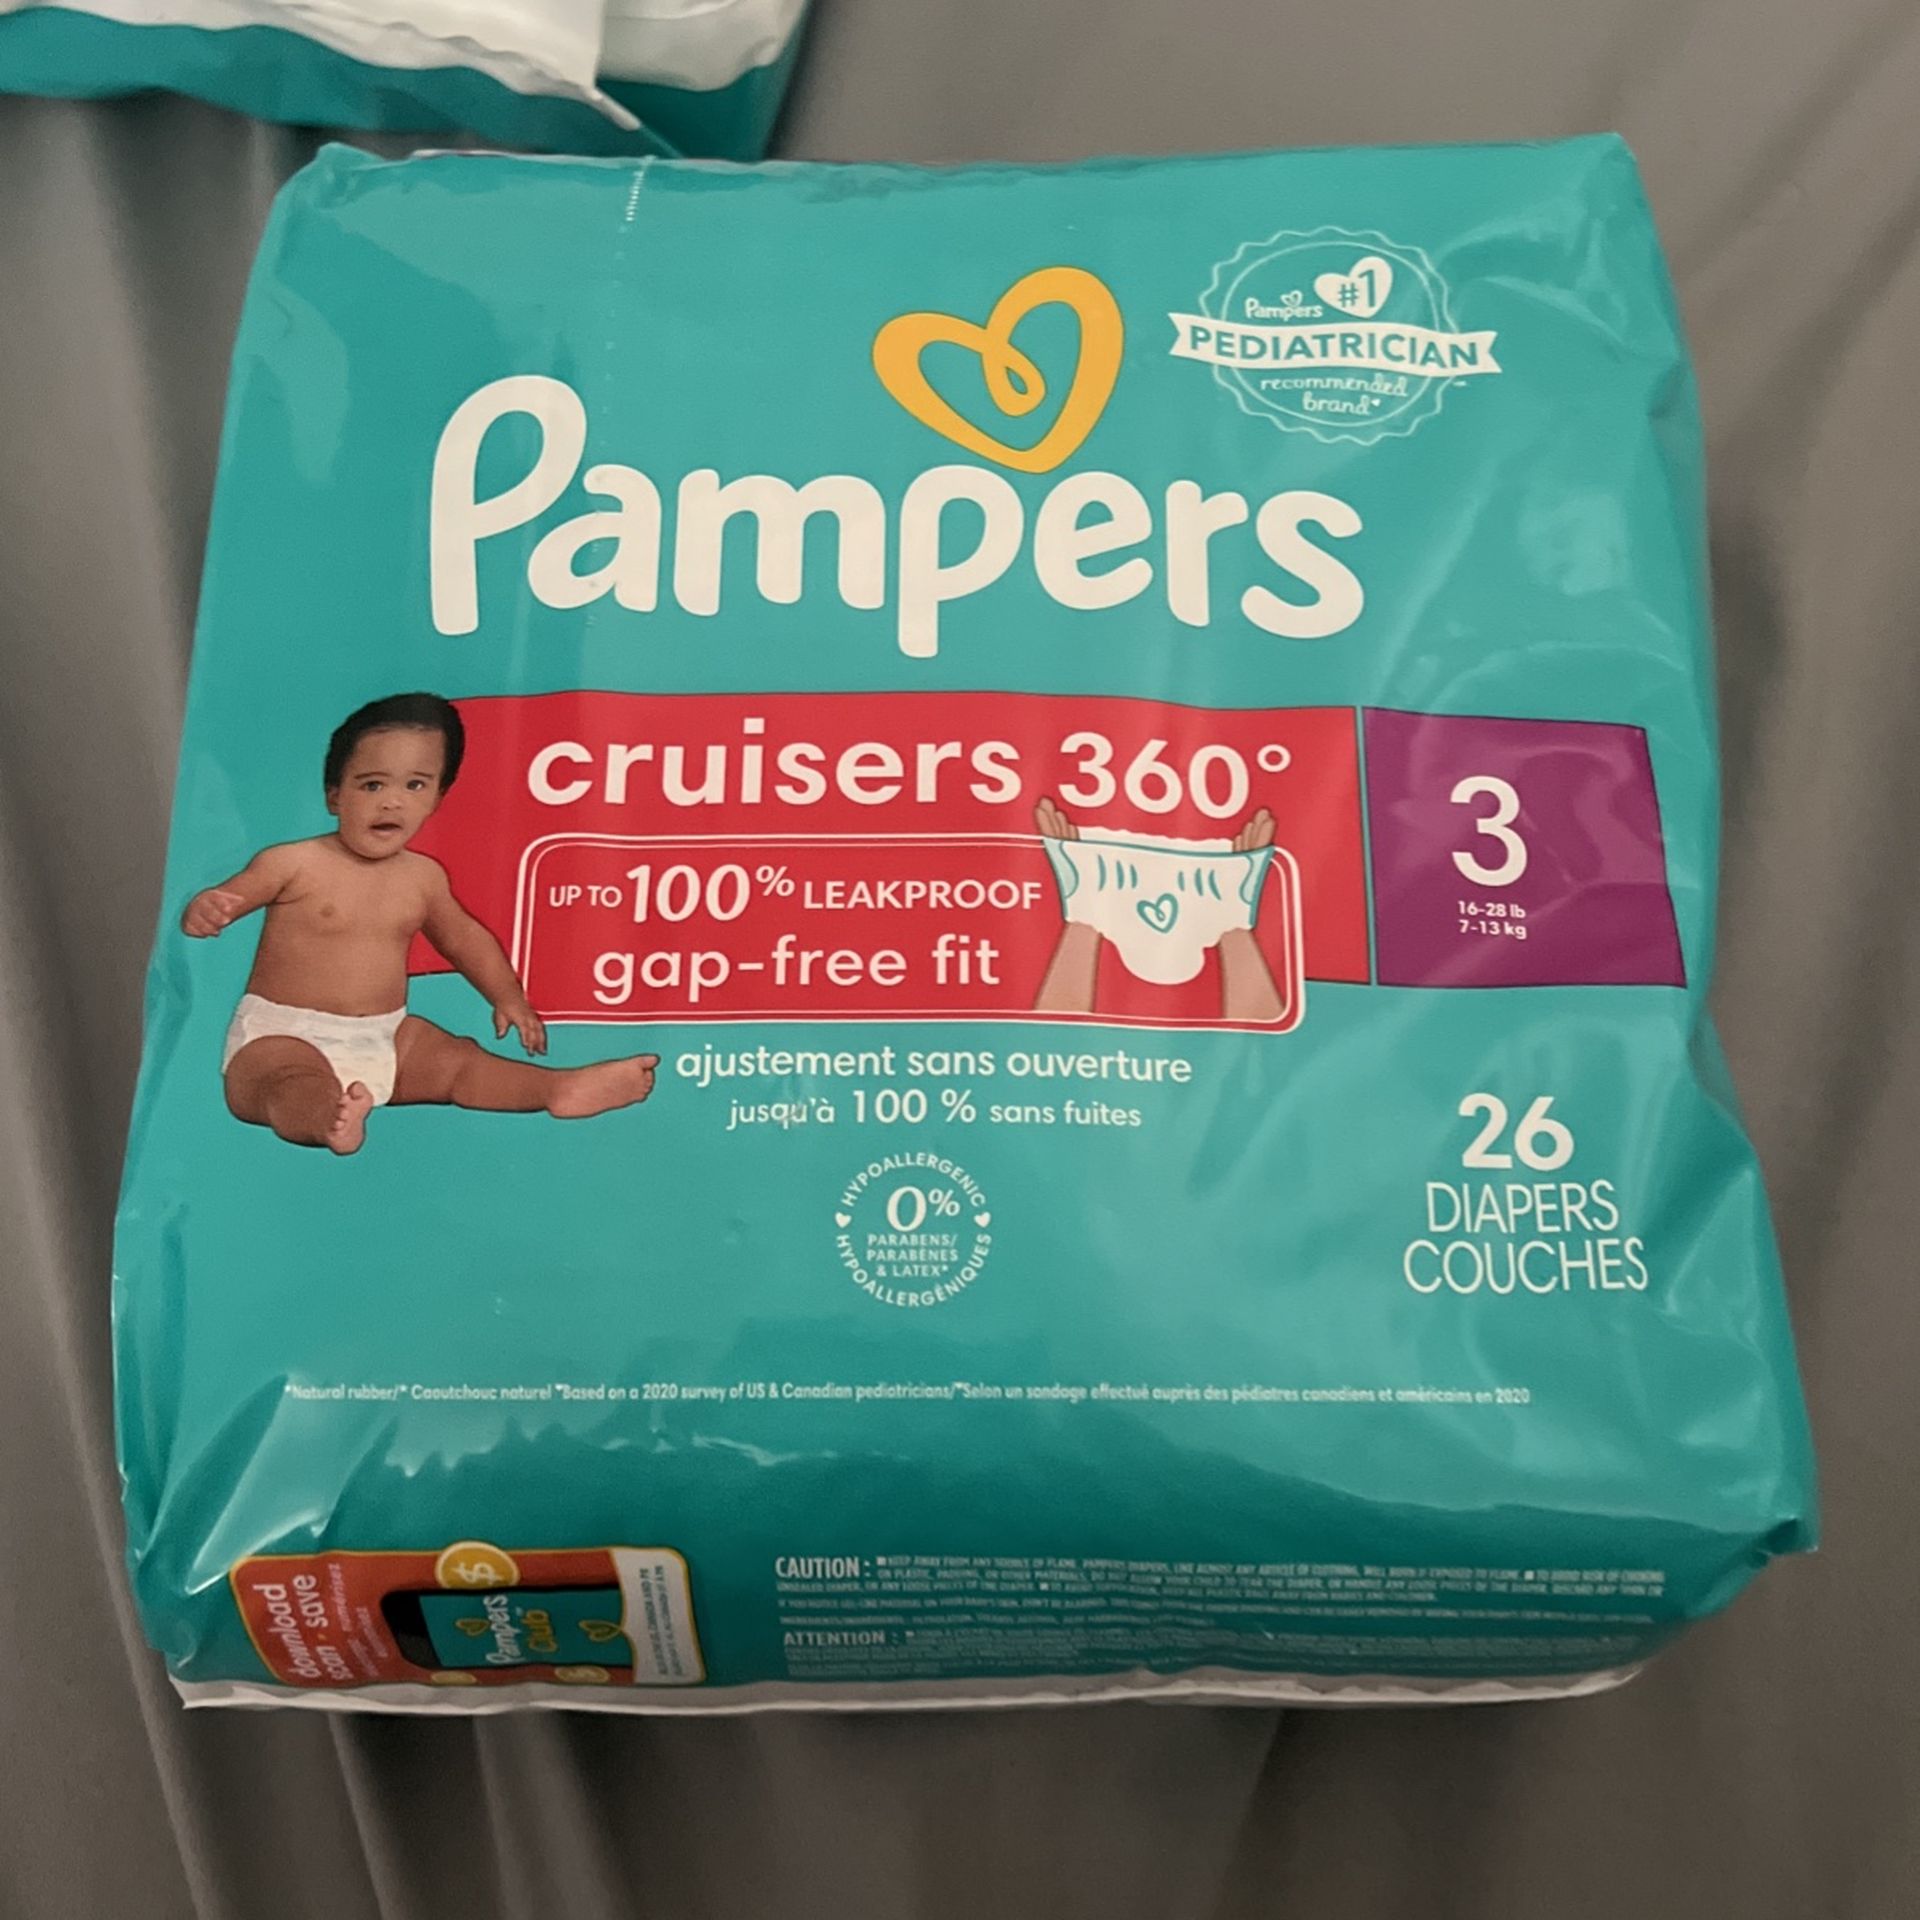 Pampers Cruisers 360 Size 3